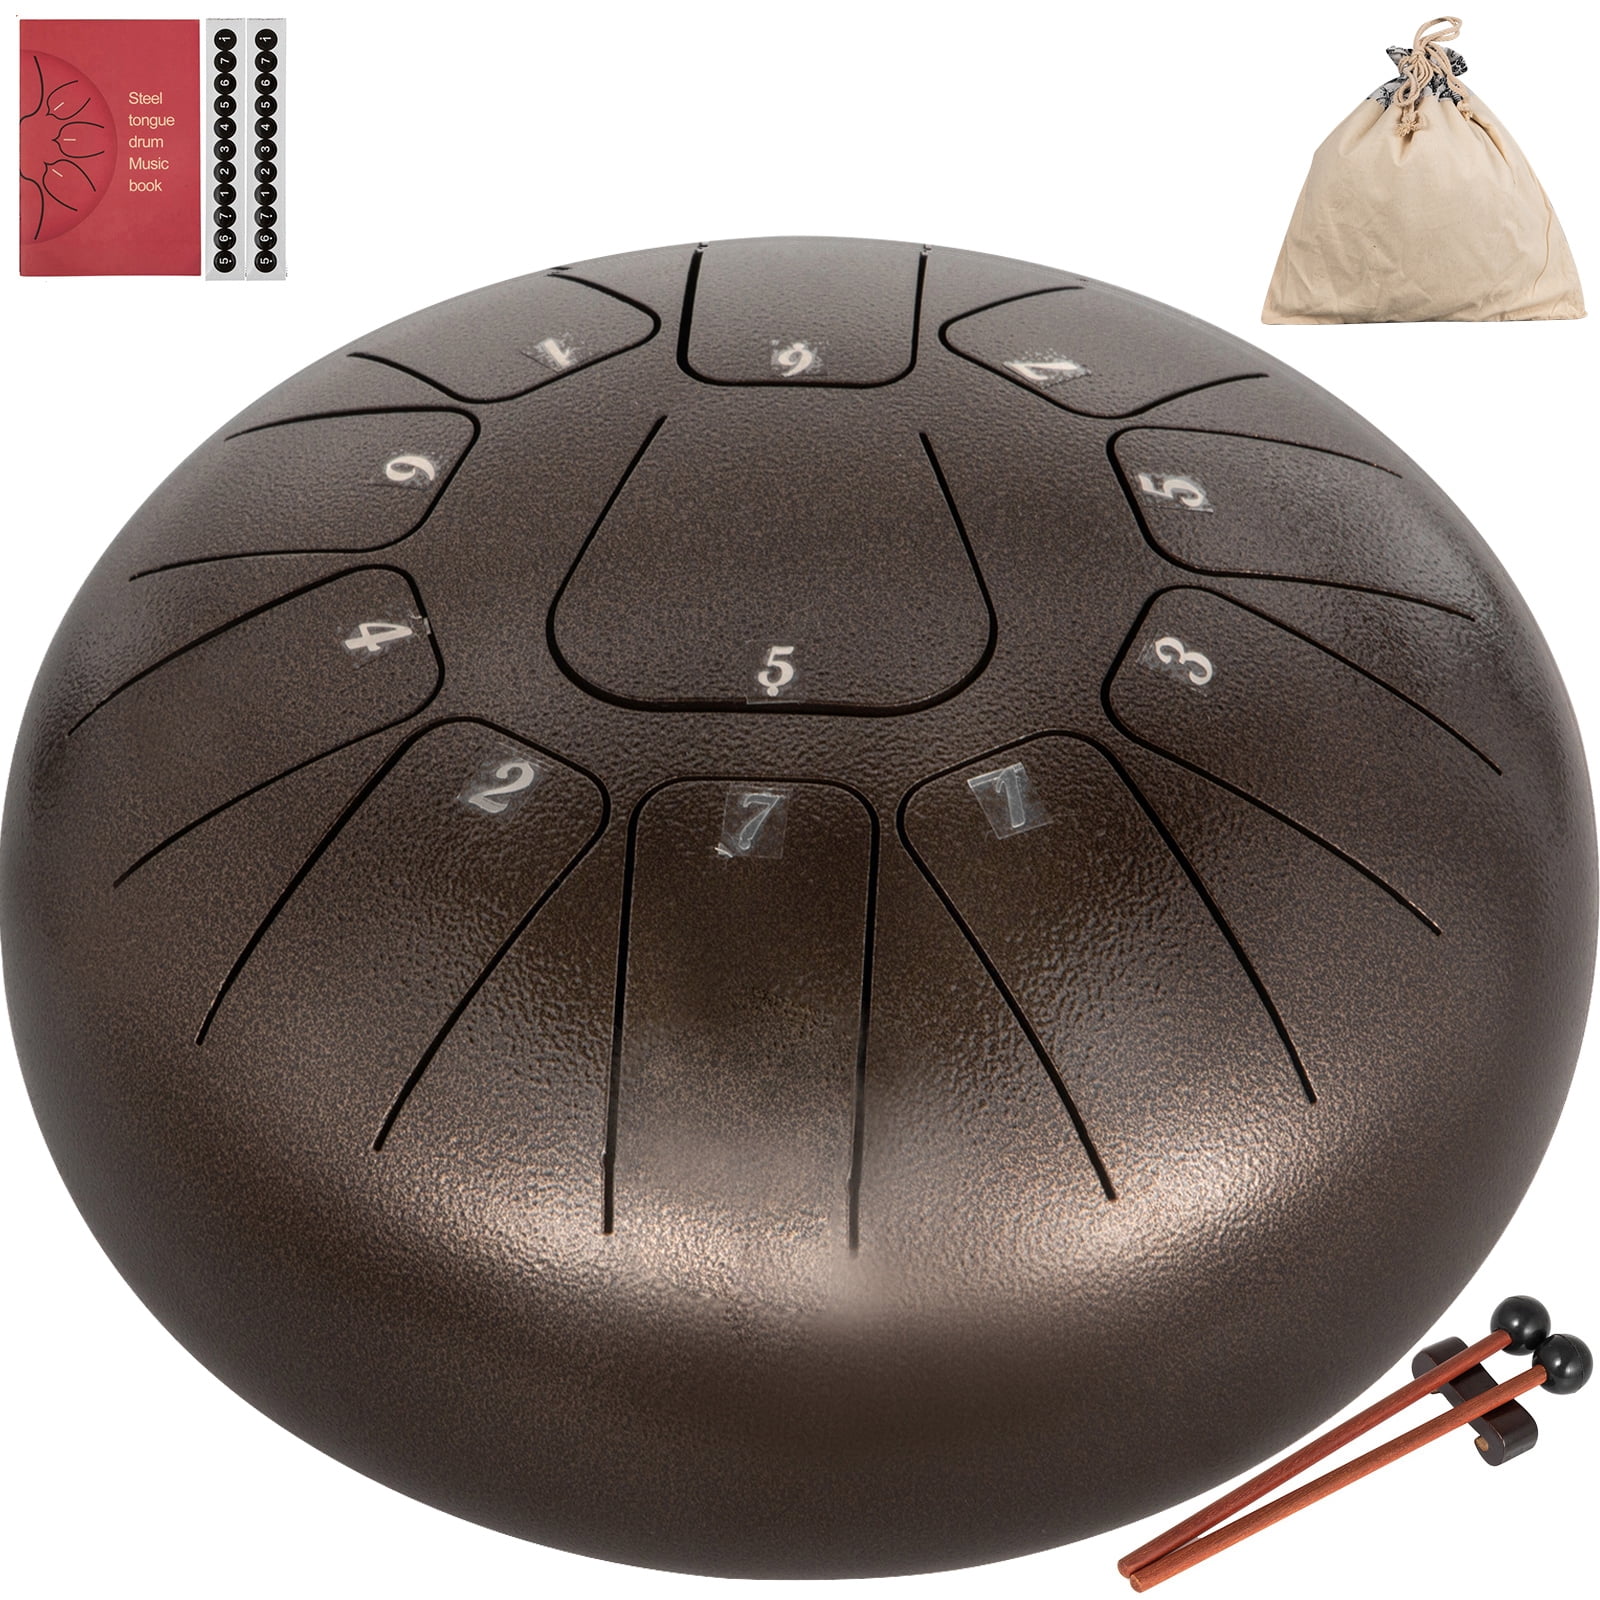 Design Steel Tongue Percussion Drum Brown Colored Hand Tank Drum Handpan 11 Notes Padded Travel Carrier+Mallet 12 